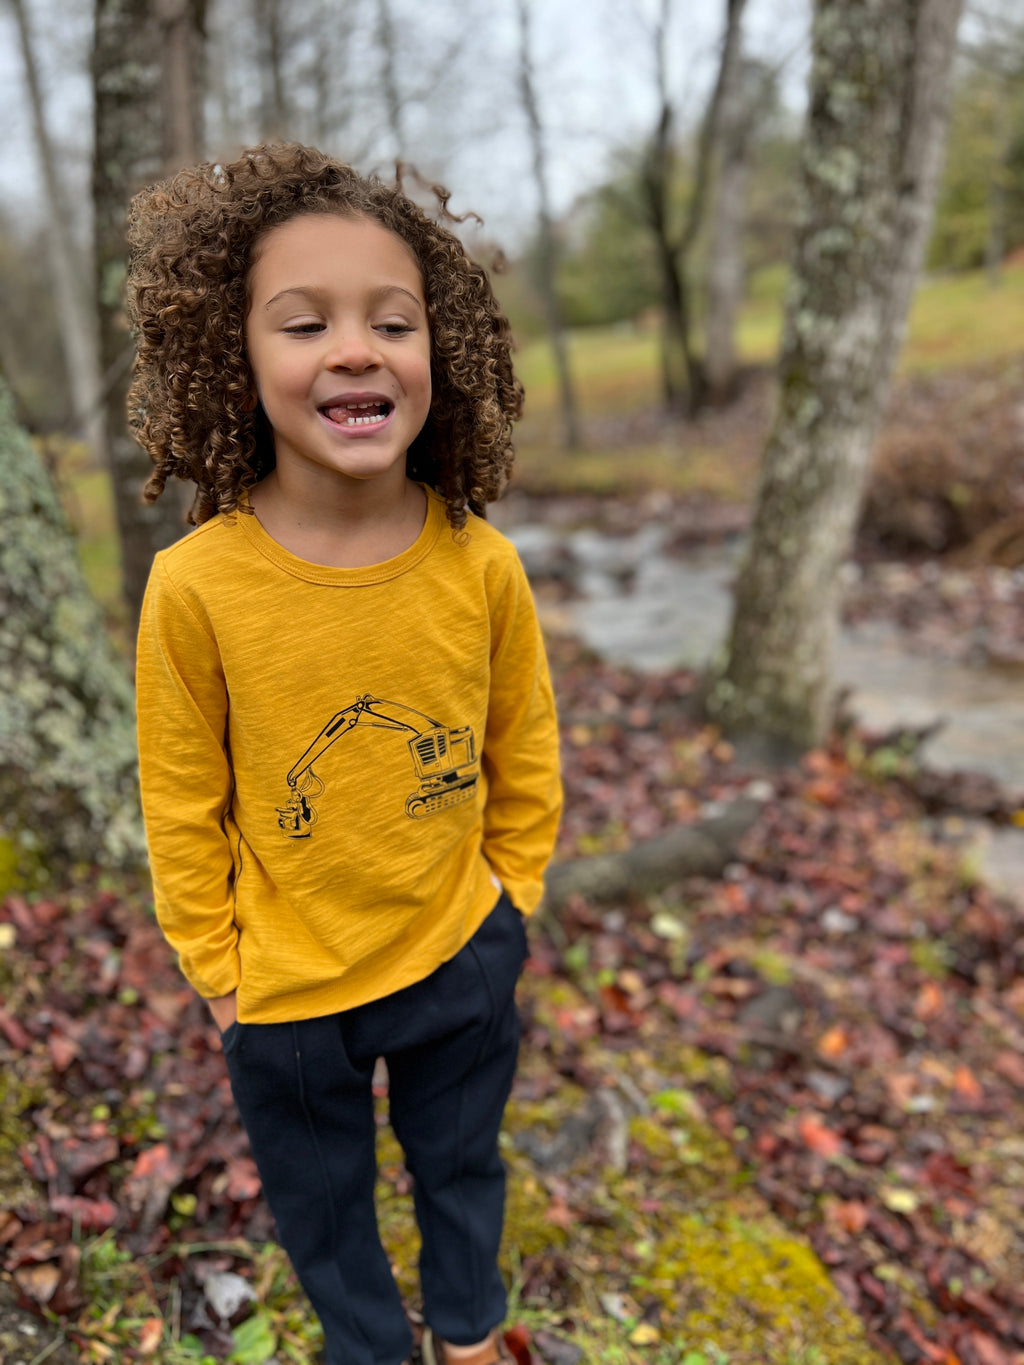 navy jog pants, white drawstrings, cuffed ankles, flexible waistband,cotton, polyester, spandex, side pockets, little boy, curly brow hair, gold digger tee, woodlands, autumn leaves